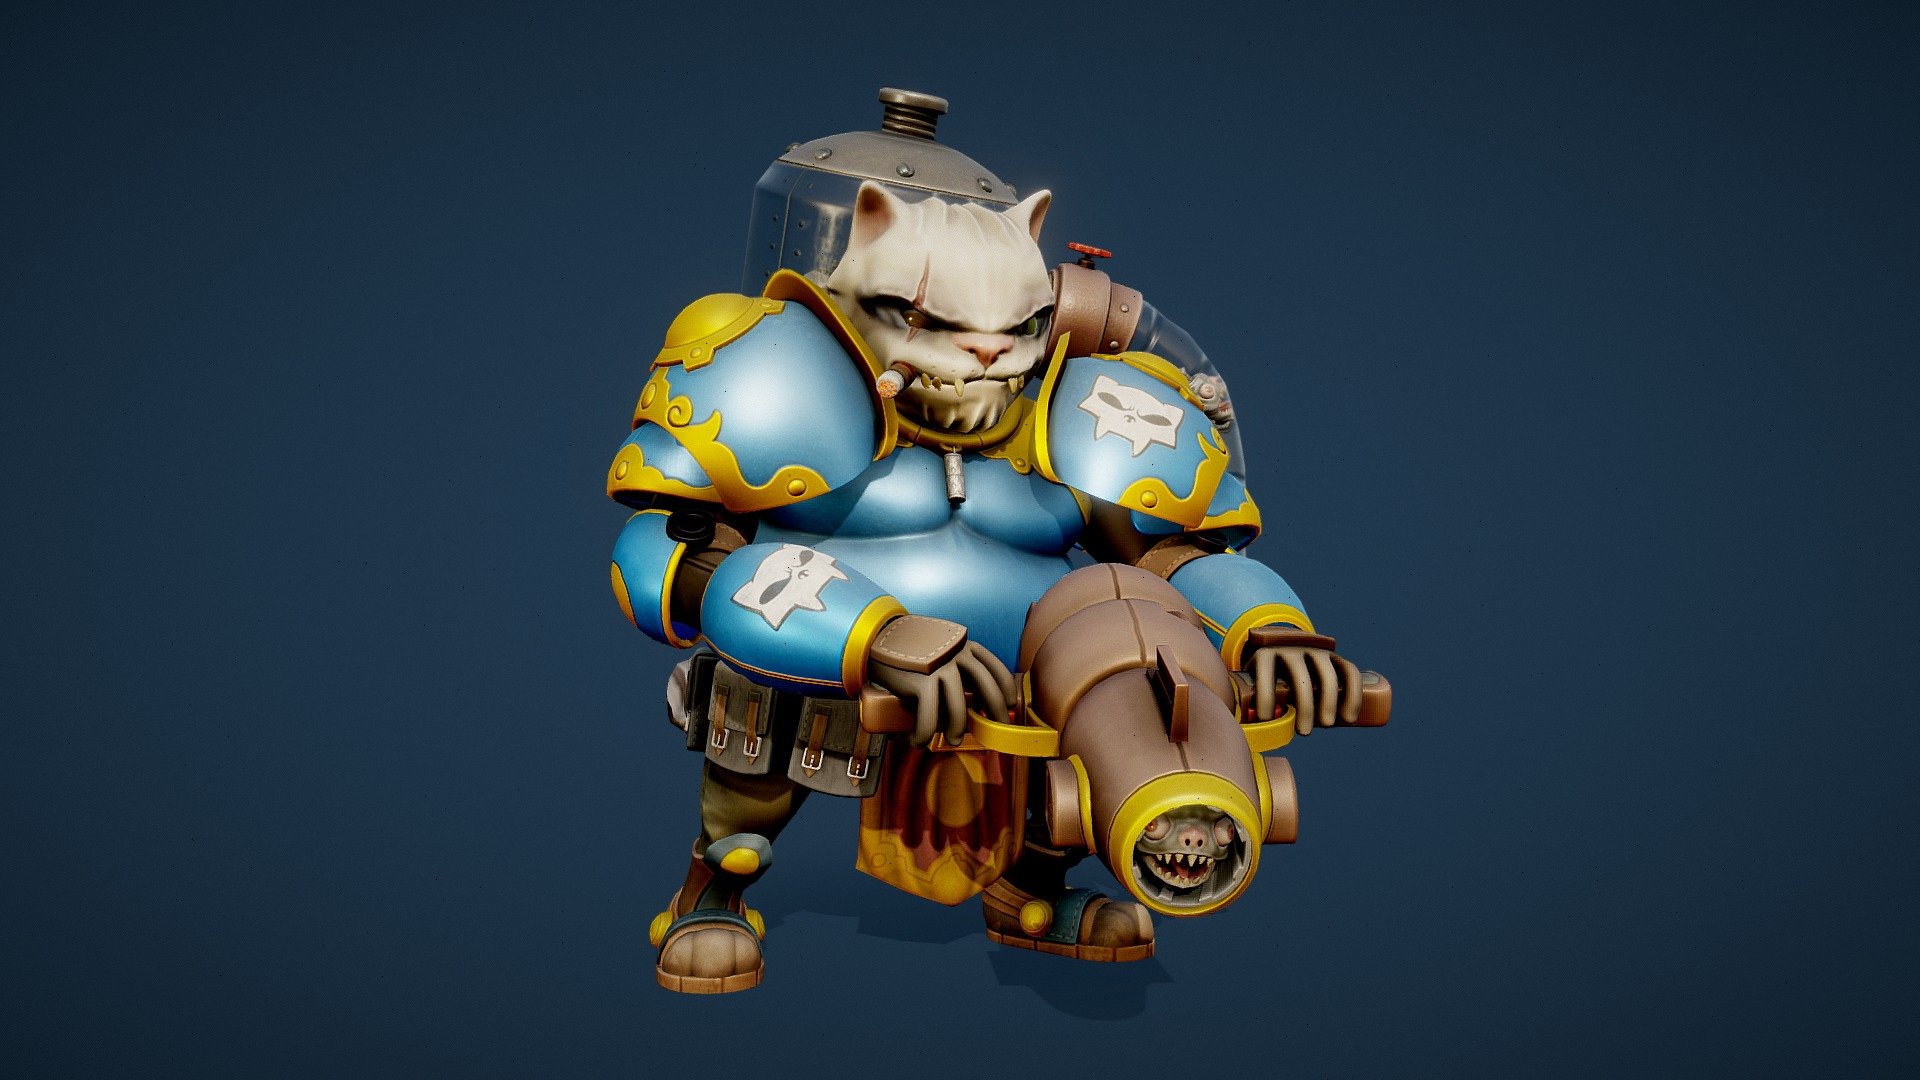 Animated 3D character based on the cat marine concept by Gerrit Willemse. 

Made with 3ds Max, ZBrush and Substance Painter 3d model